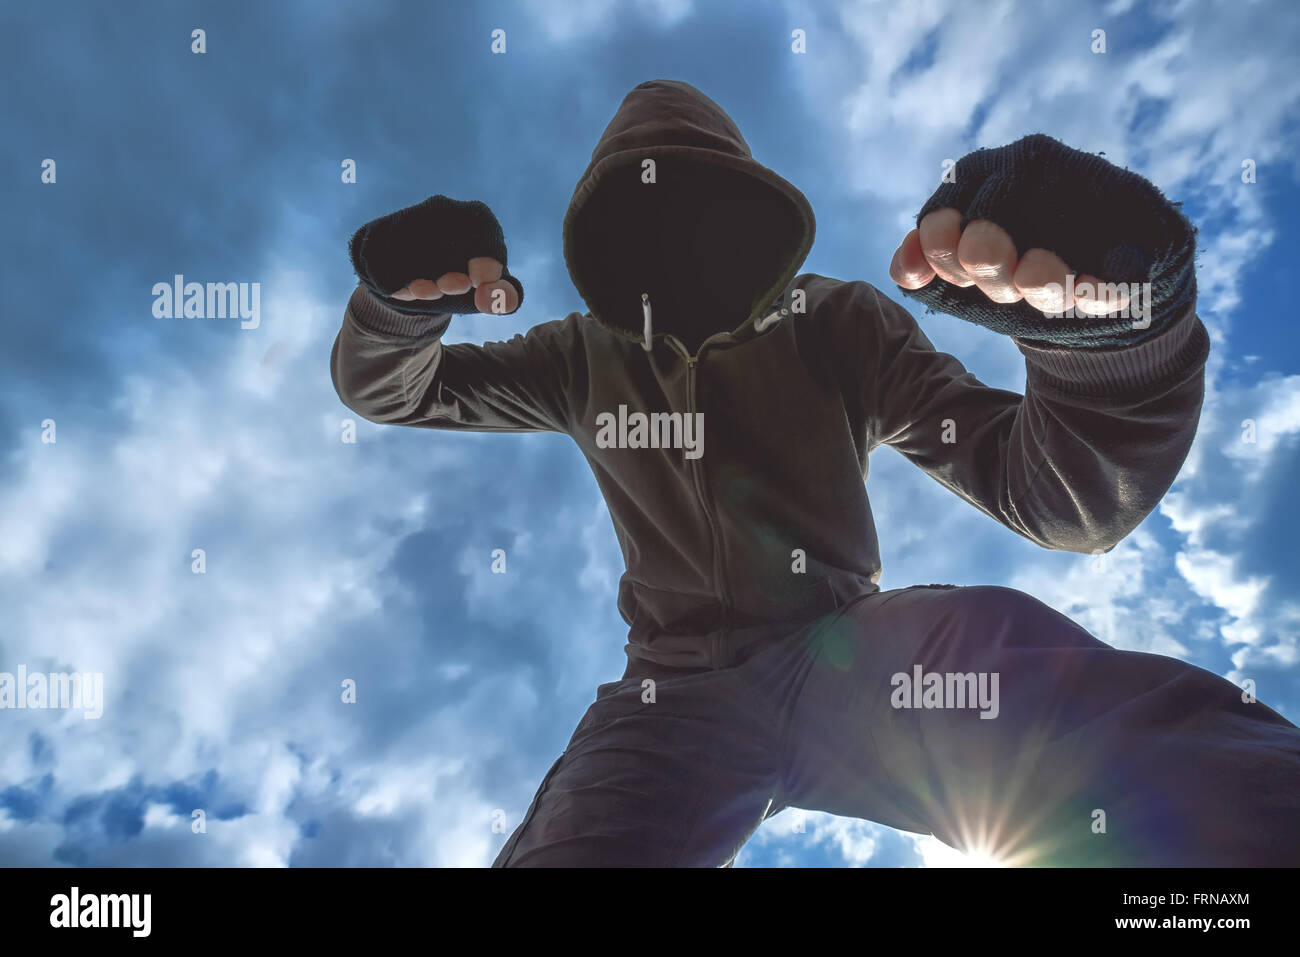 Violent attack, unrecognizable hooded male criminal kicking and punching victim on the street. Stock Photo